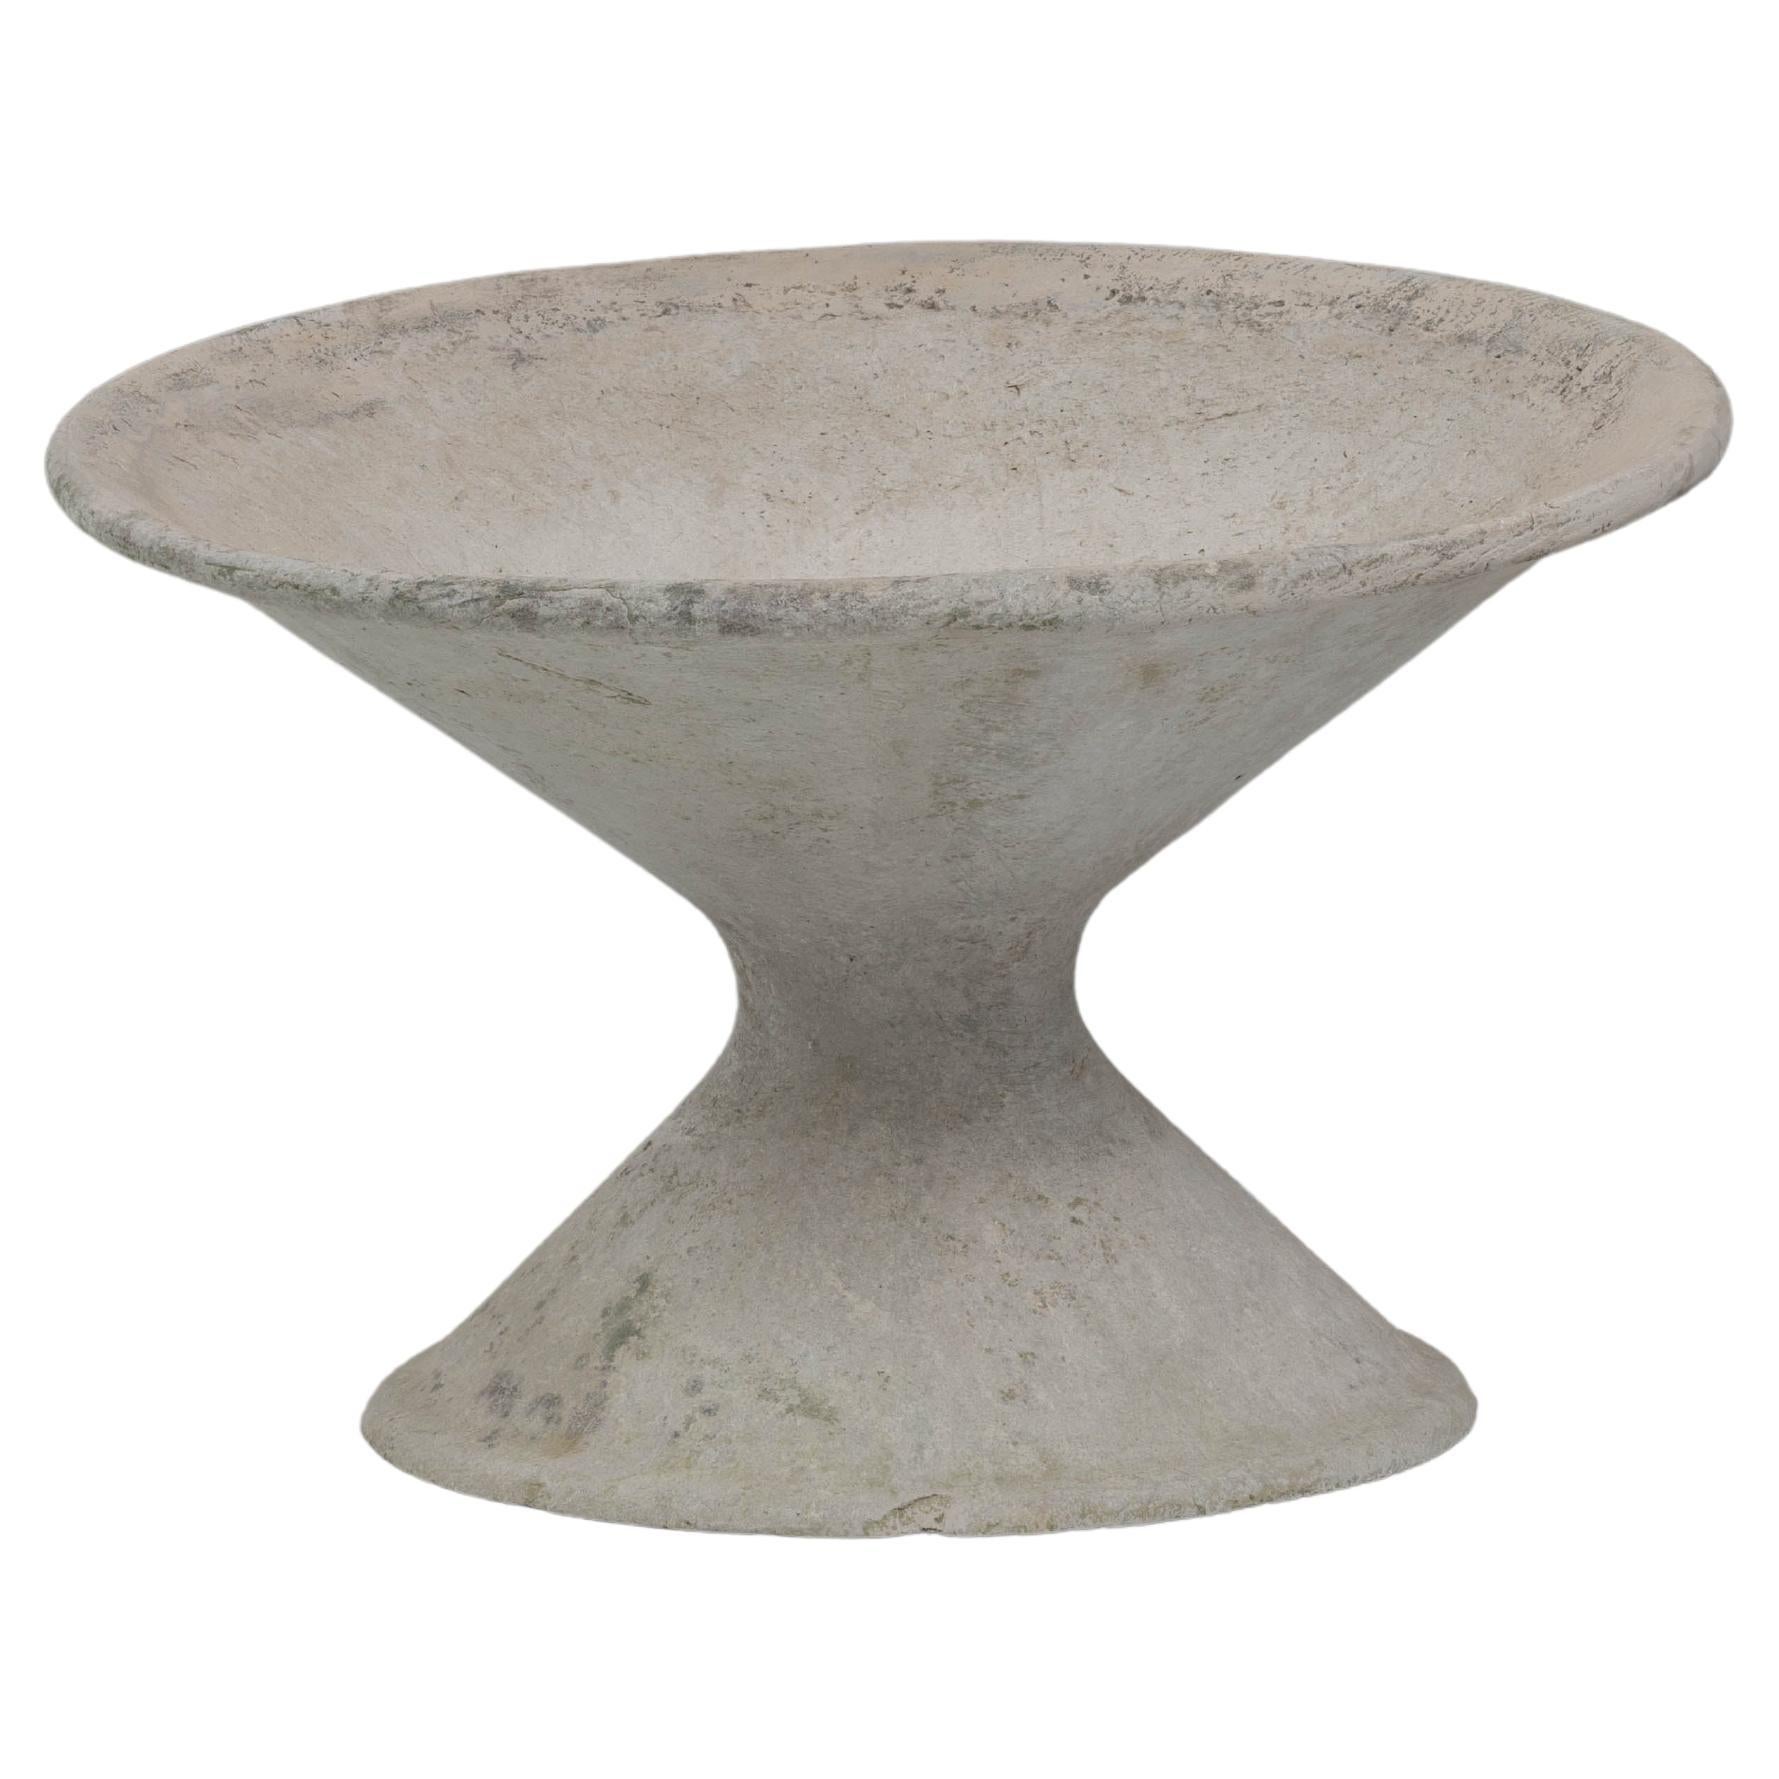 1960s French Concrete Planter By Willy Guhl For Sale